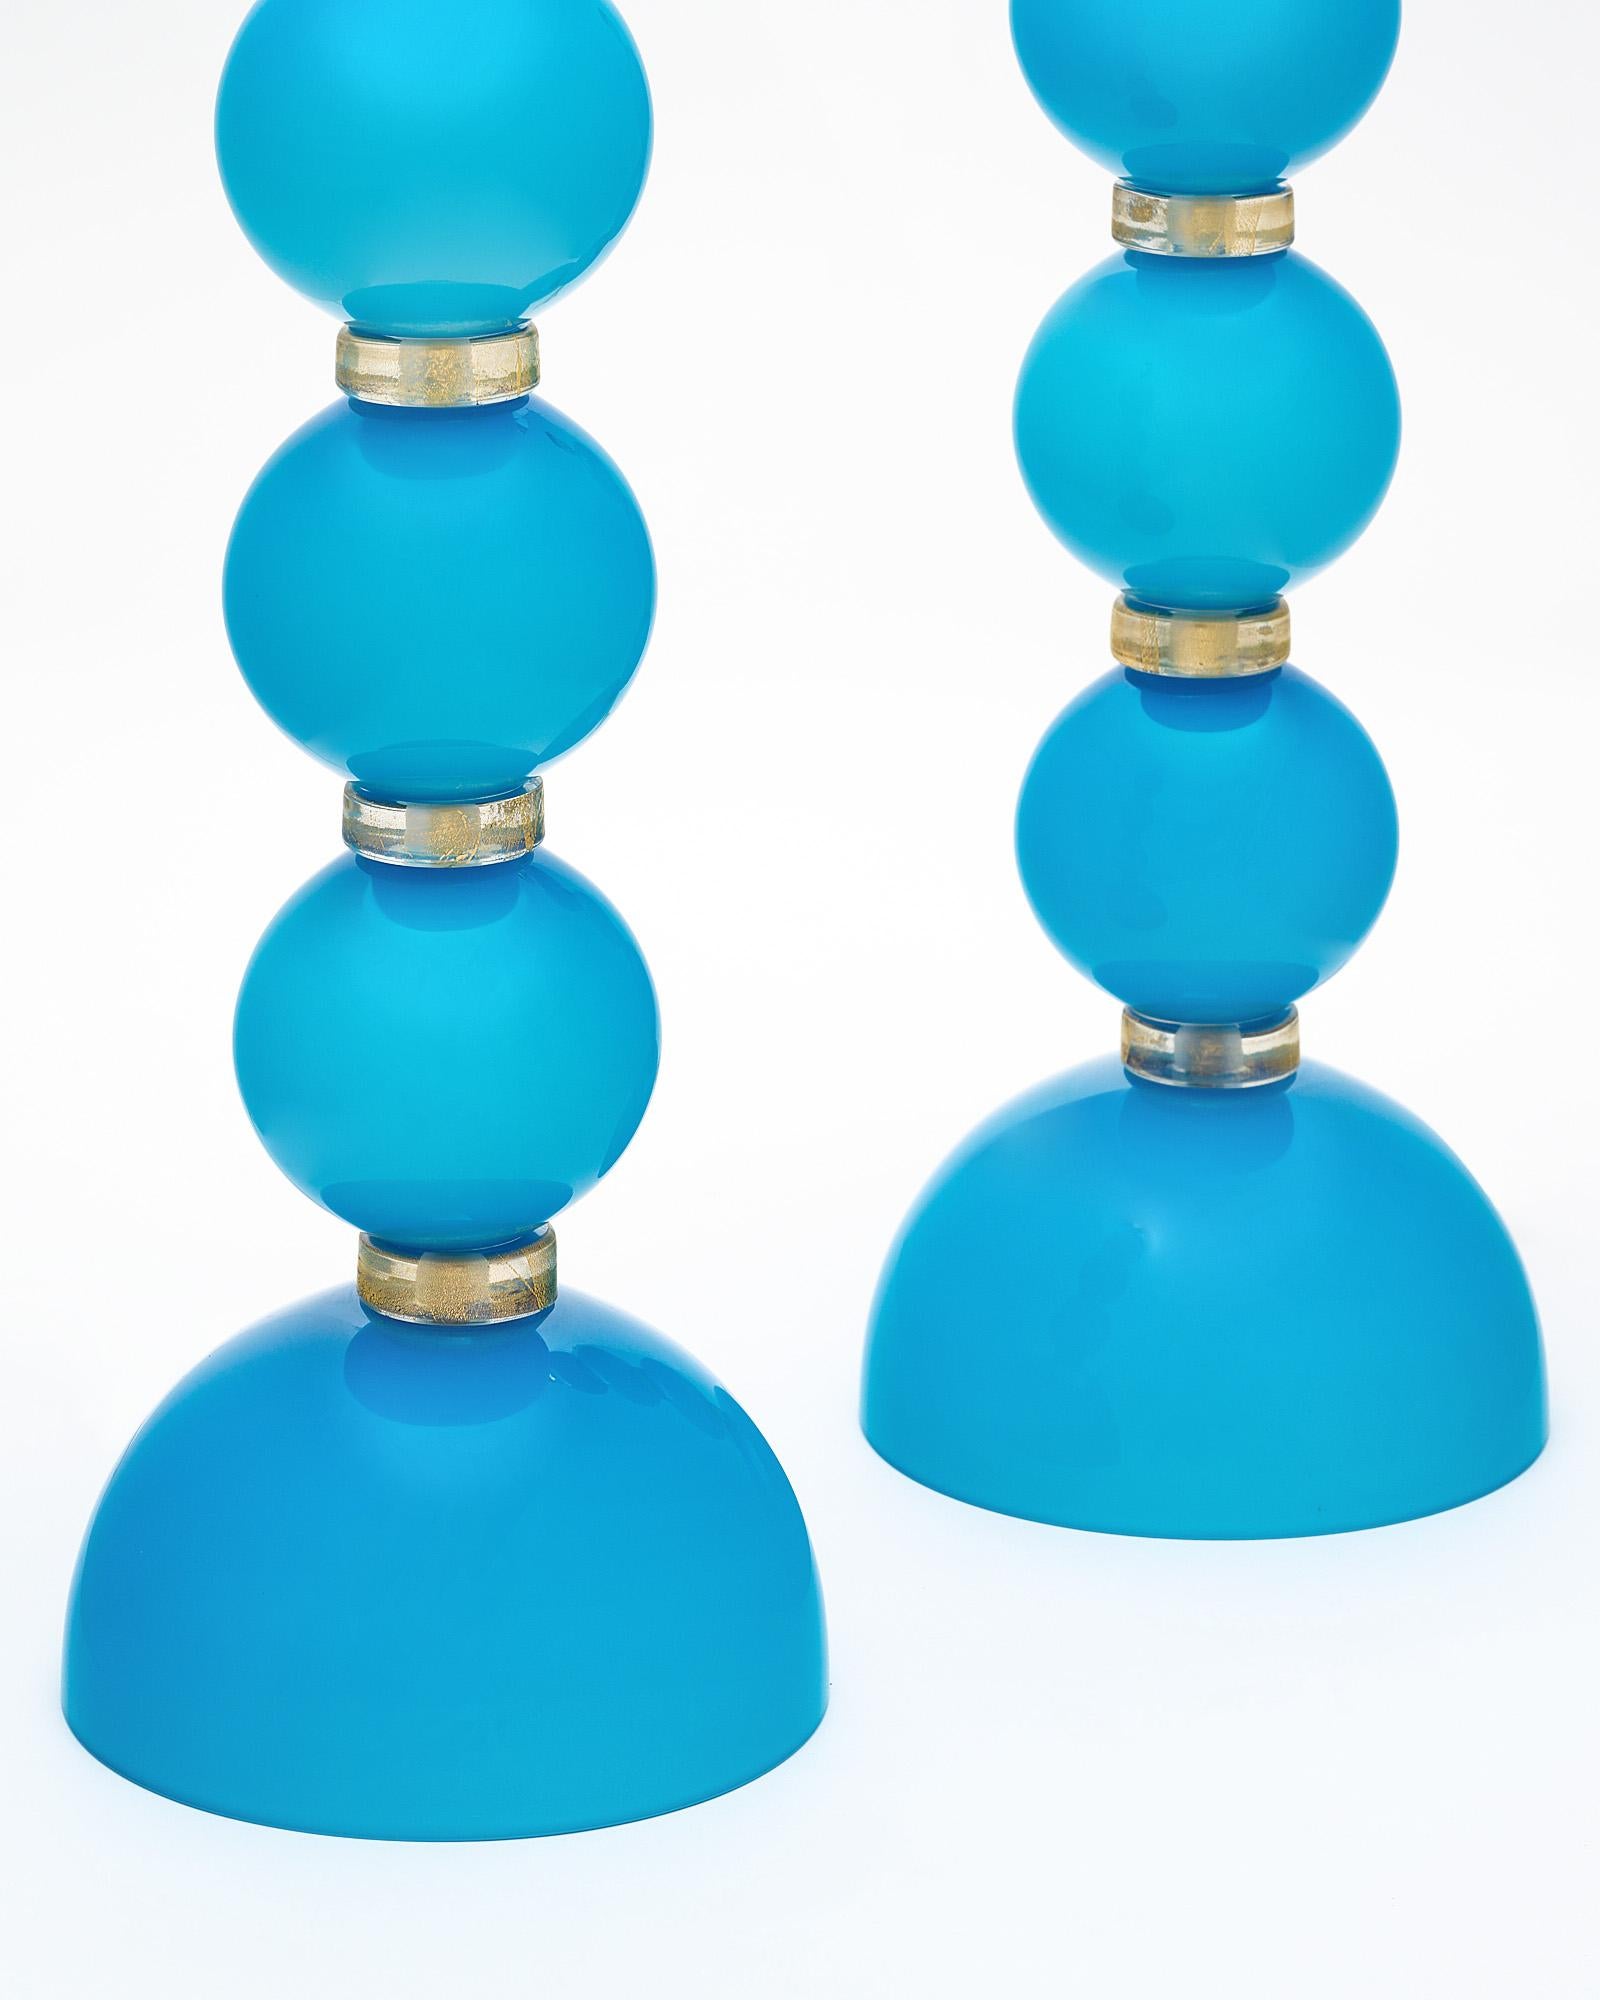 Murano glass table lamps from the island of Murano outside of Venice, Italy. This hand-blown pair has a striking bright turquoise color to the glass elements. They have been newly wired to fit US standards.